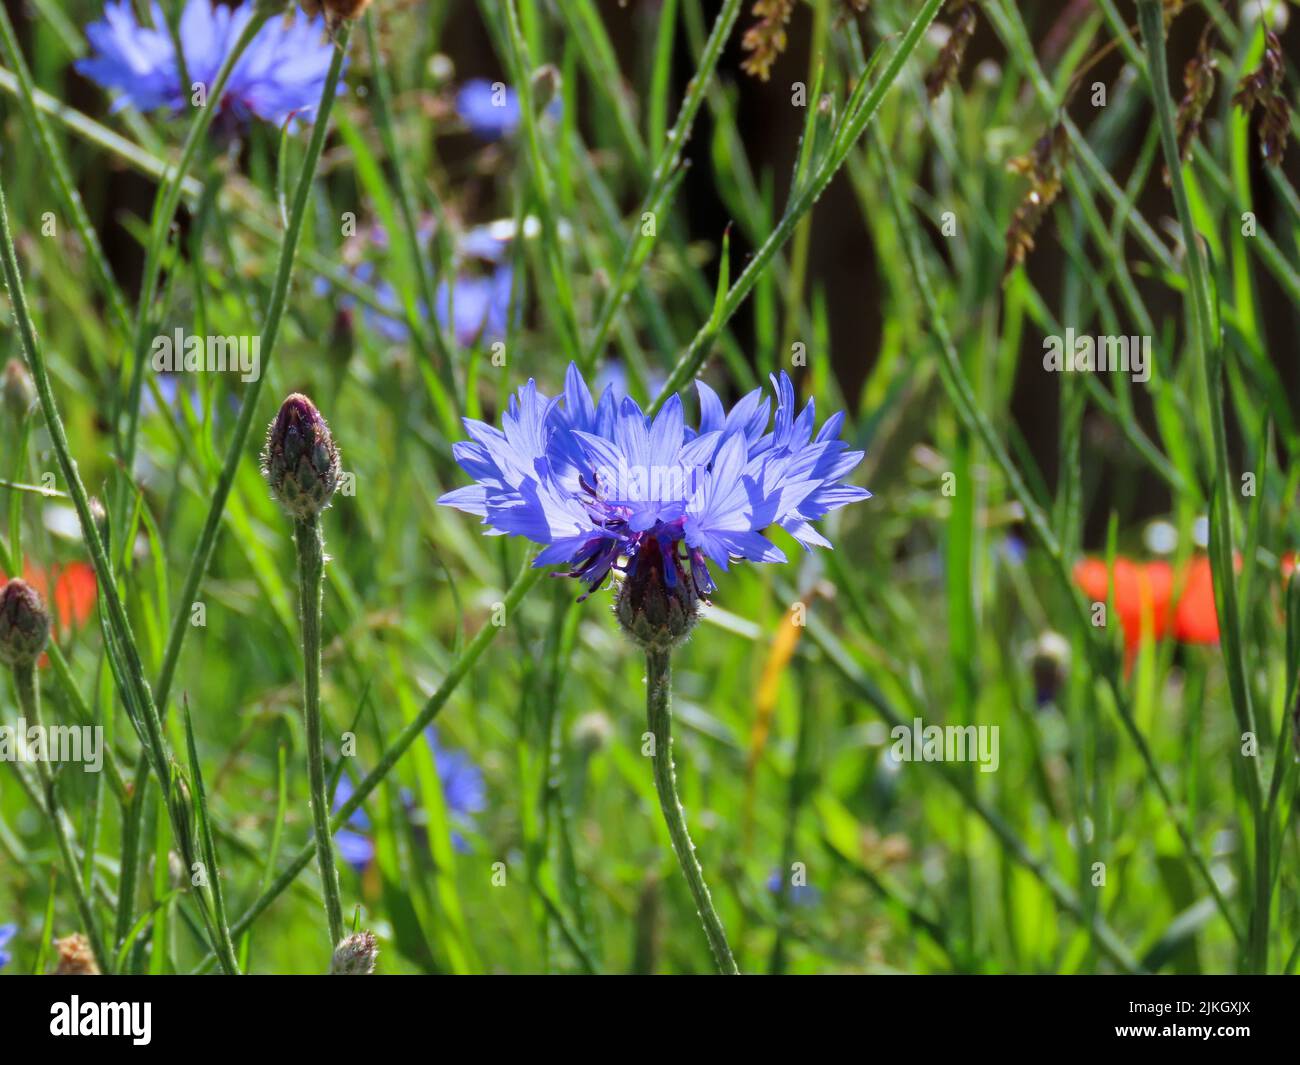 bright blue flowers of the cornflower also known as bachelor's button Stock Photo